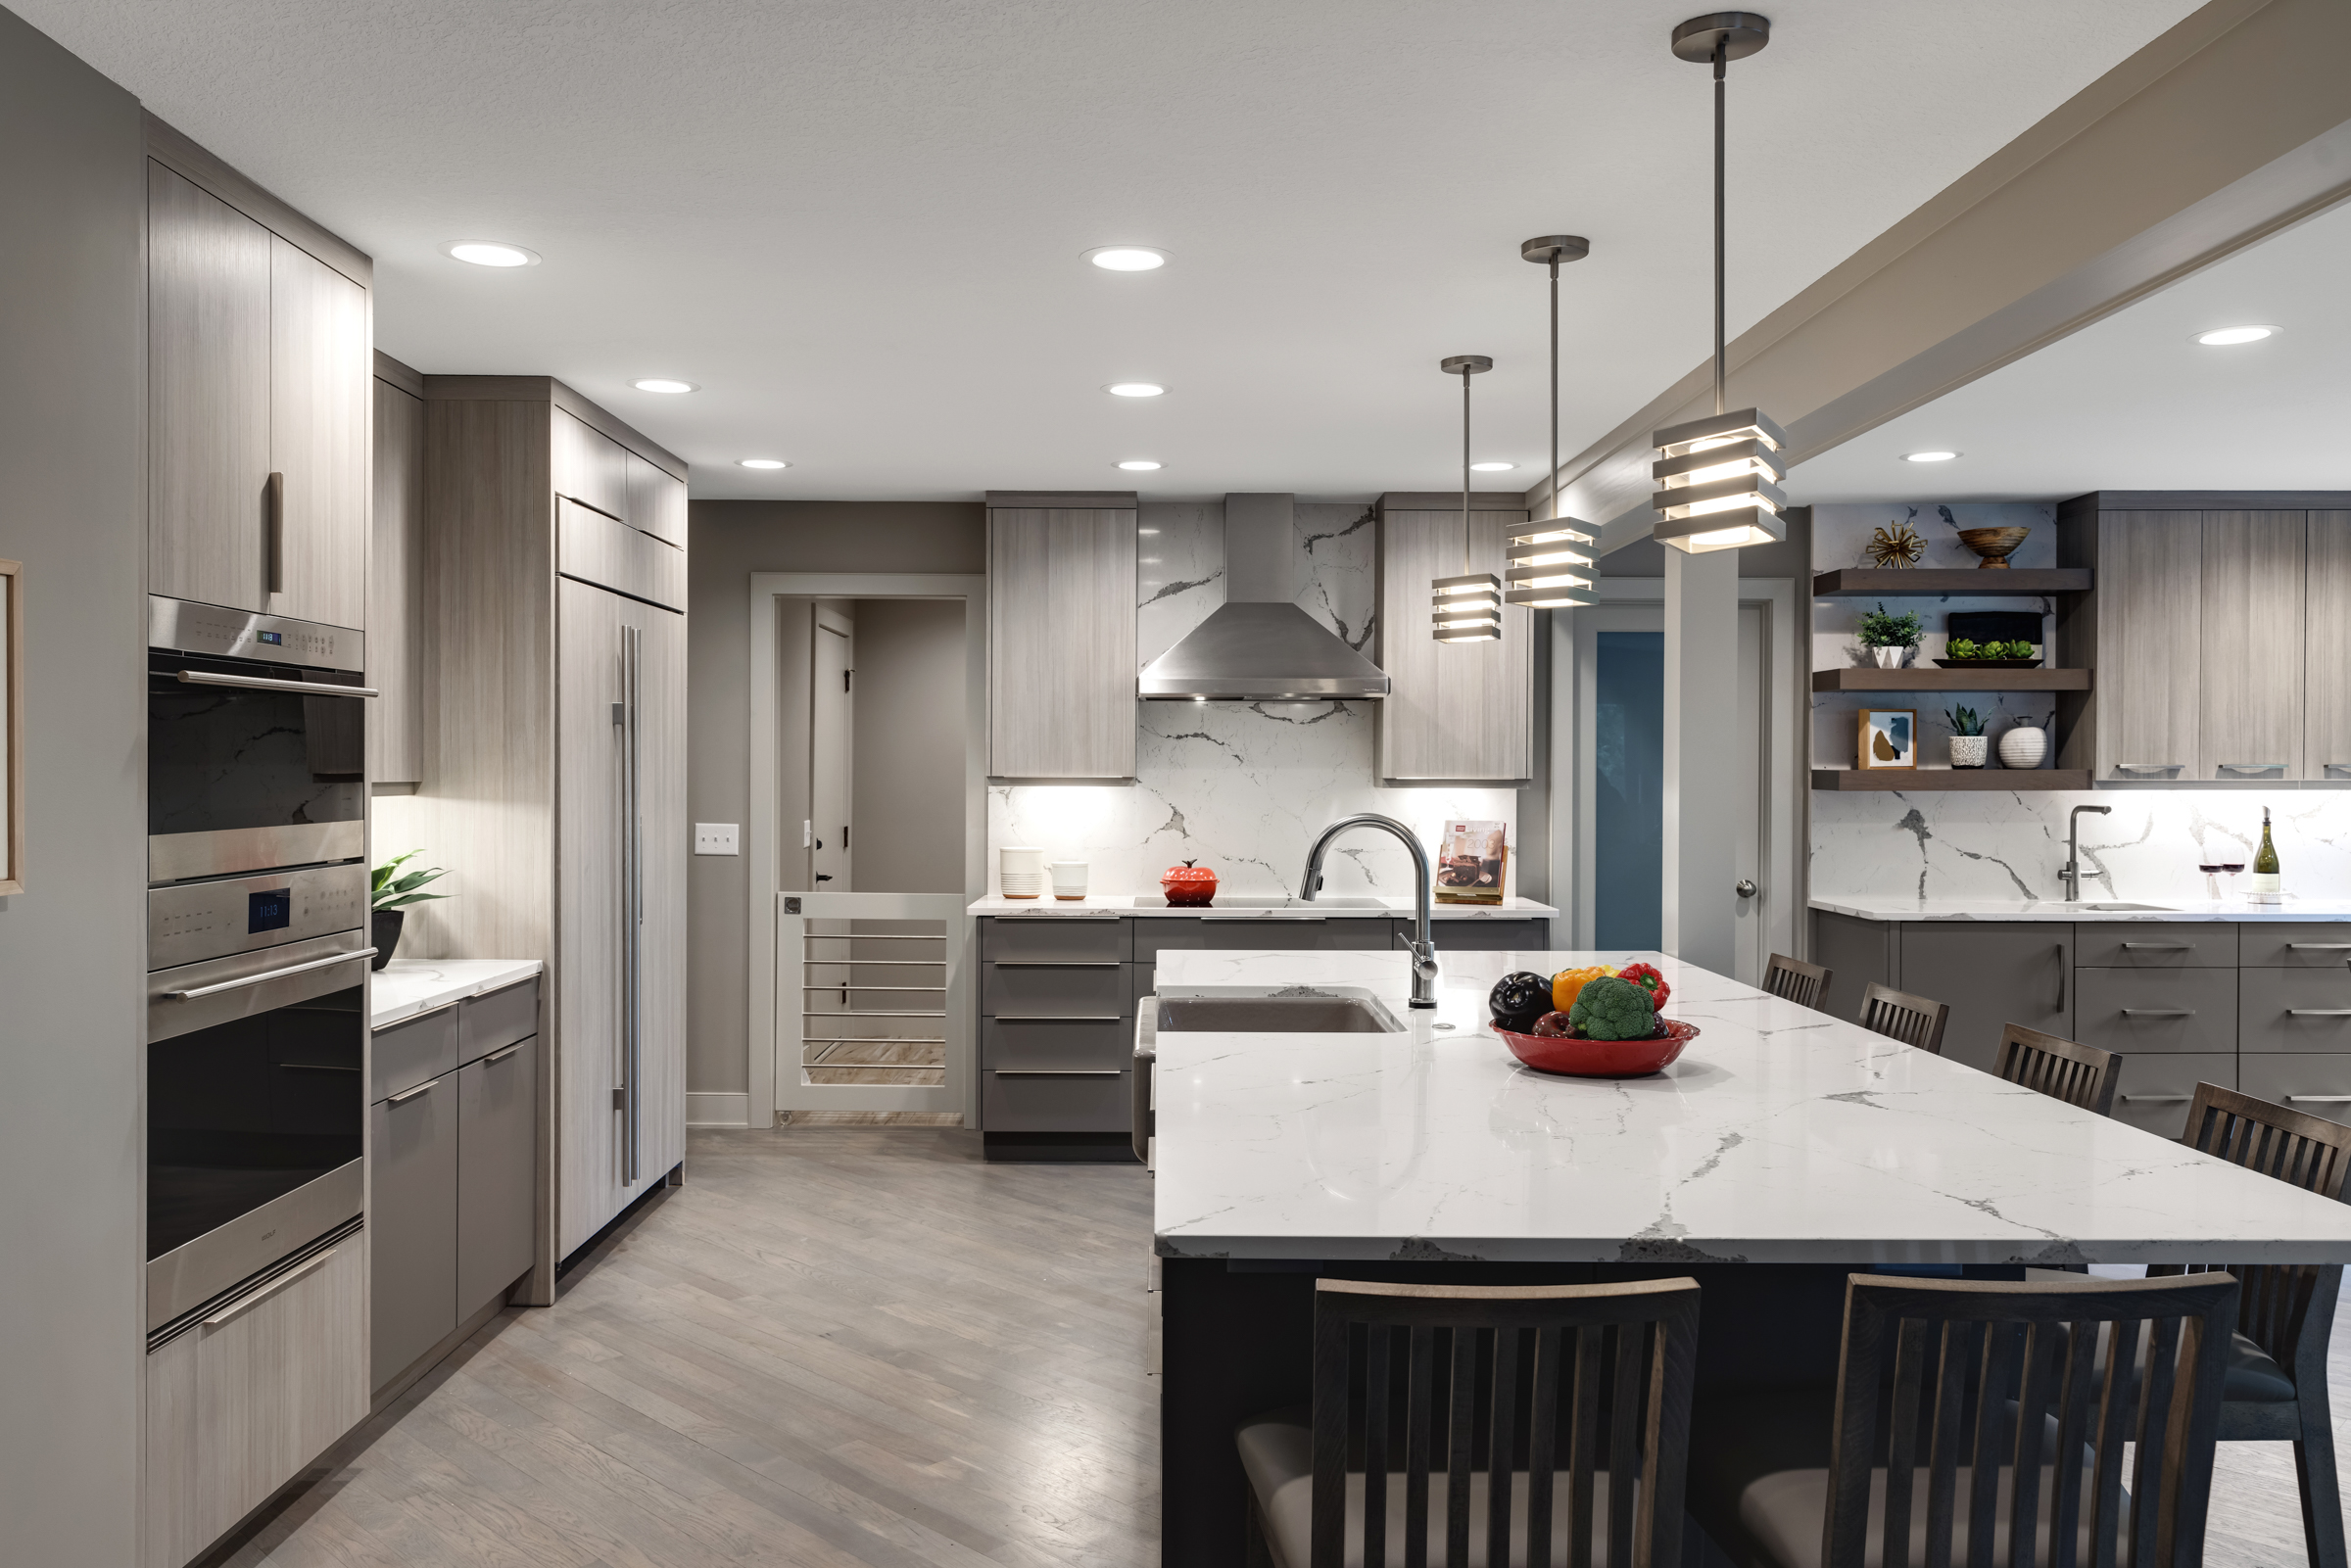 Contemporary kitchen addition with dark island, light floors, and updated appliances